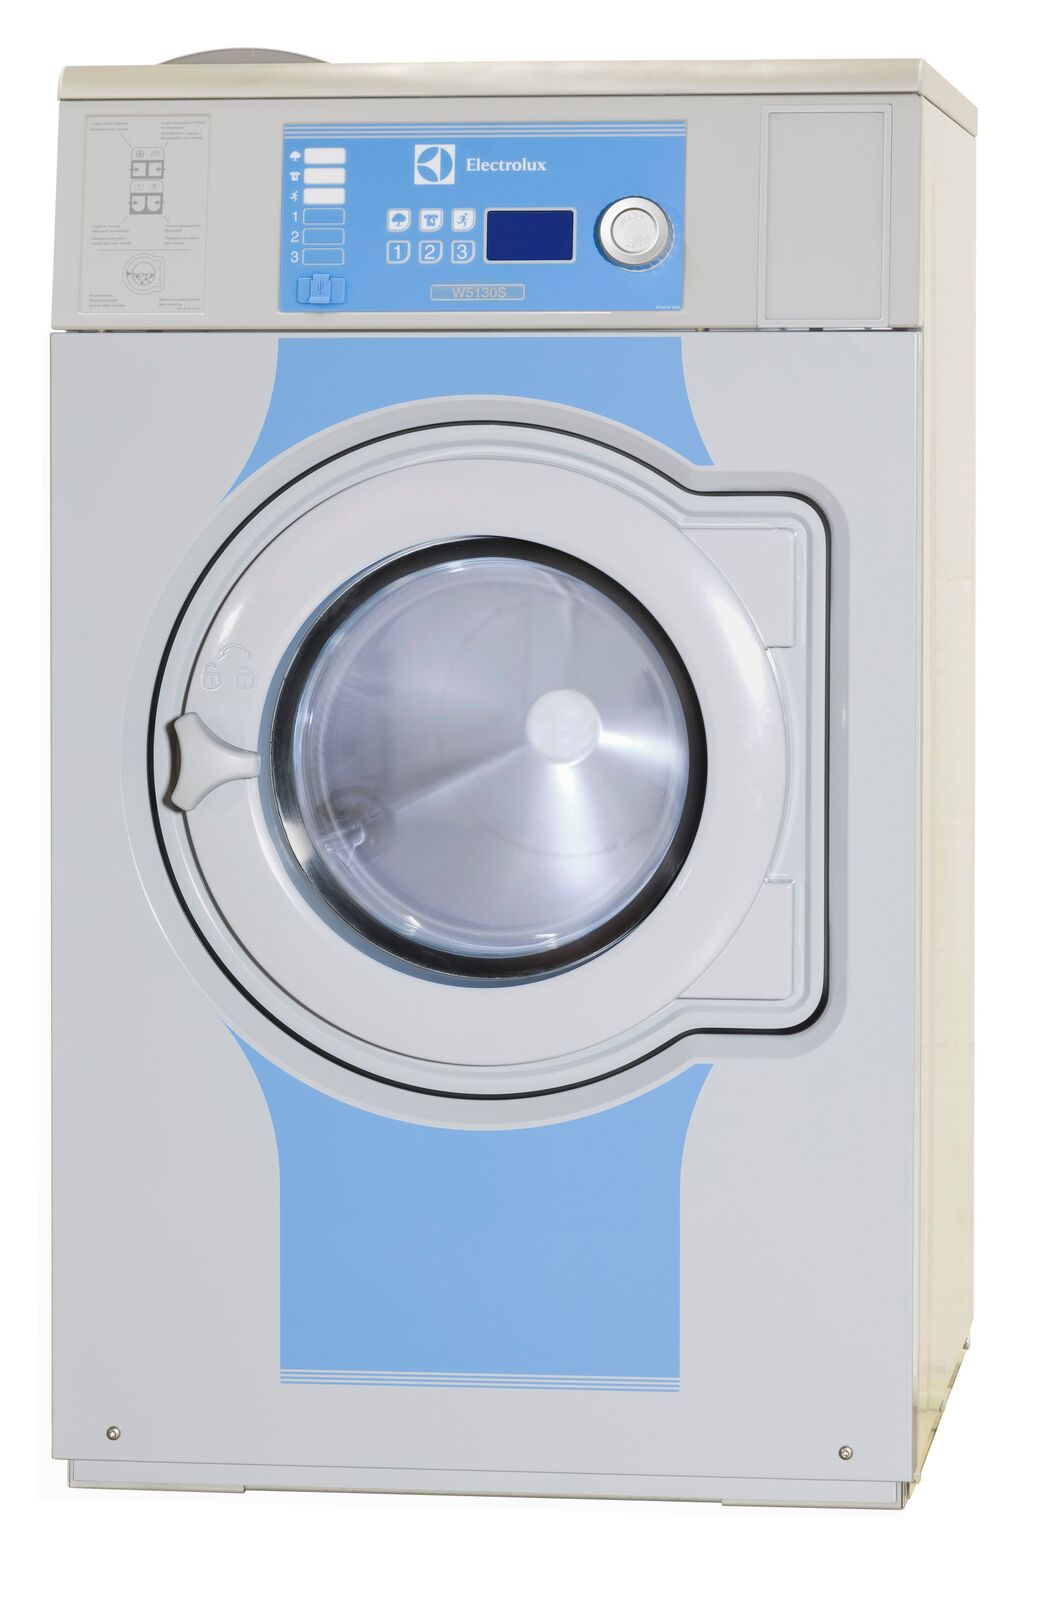 New 2020 Electrolux W5250N - Cardinal Laundry Equipment Co